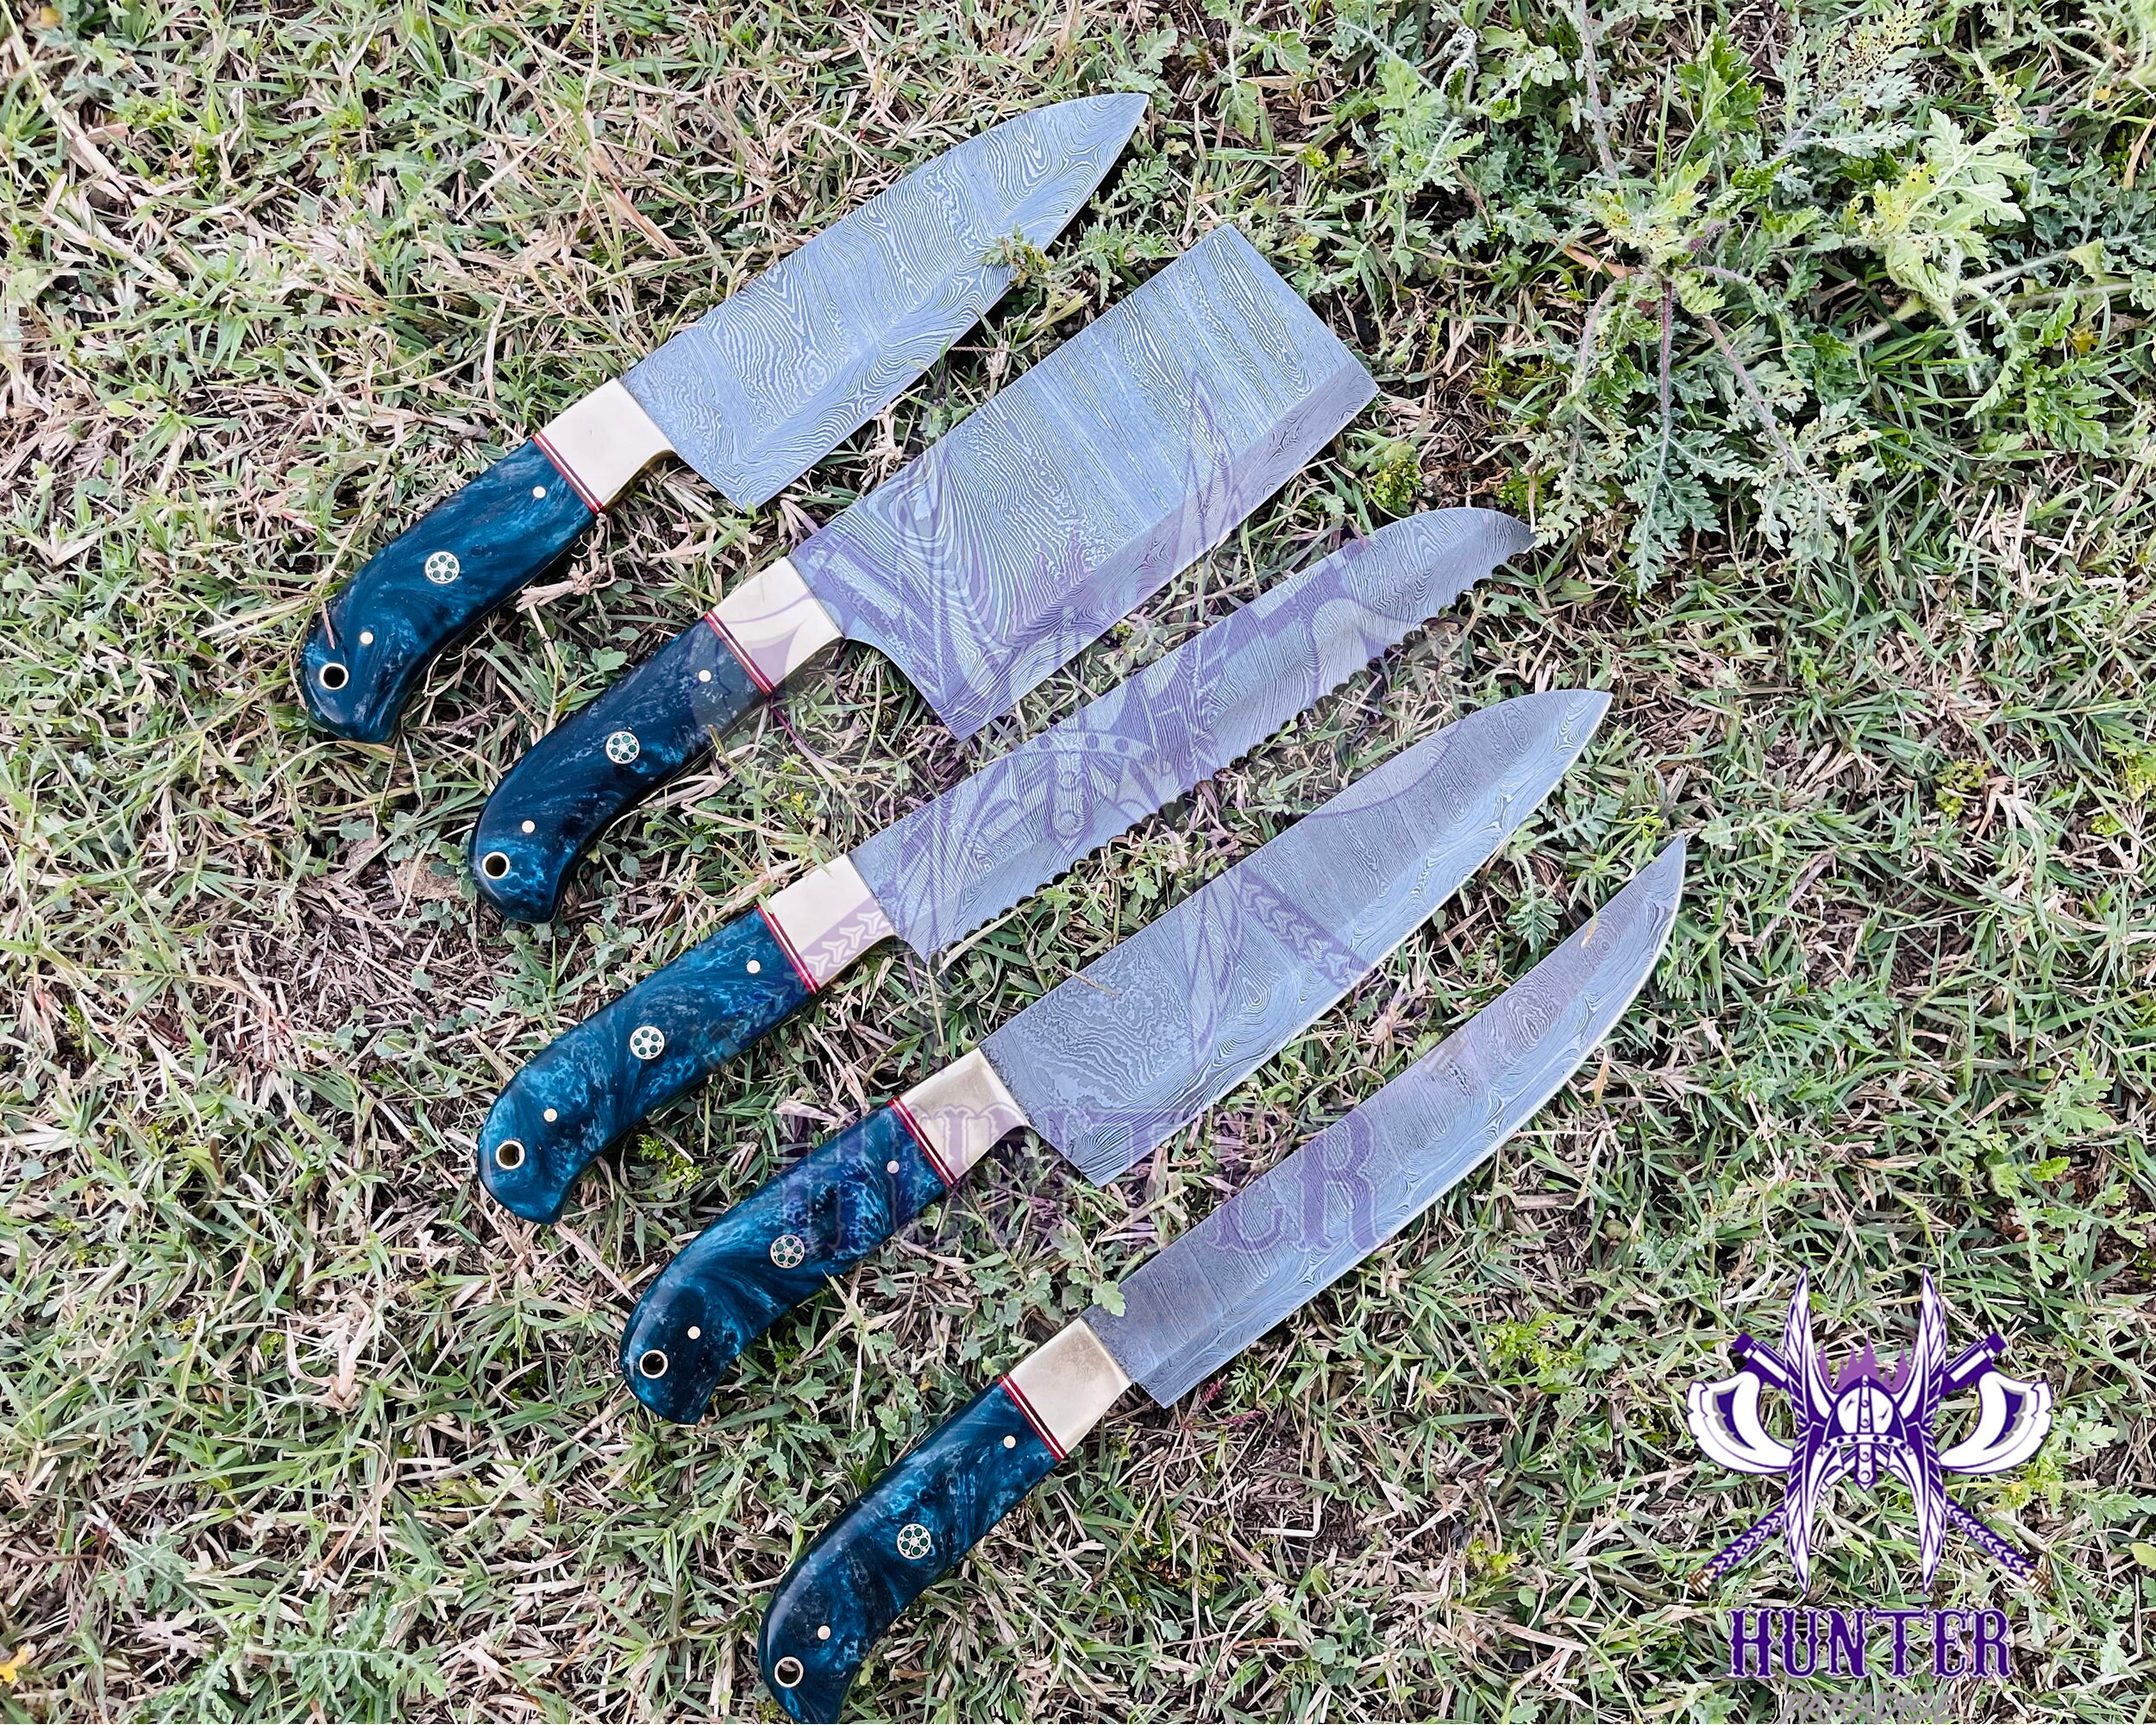 Randy,Custom made damascus steel kitchen/chef's knife set with leather roll  bag DR-1061-B-6.